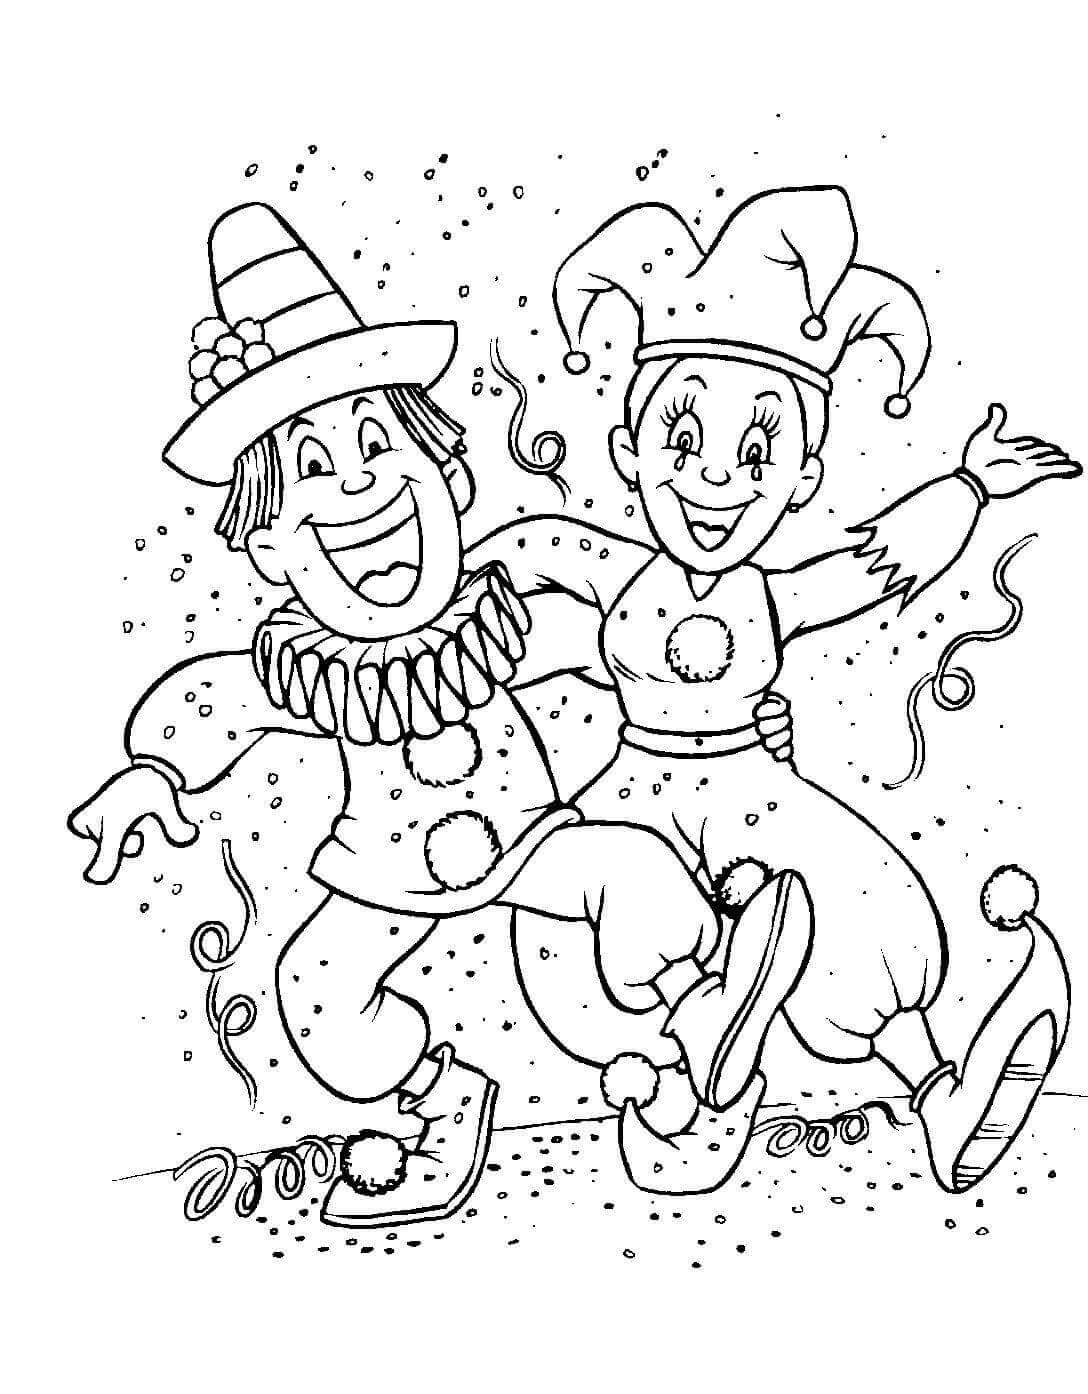 Printable Mardi Gras Coloring Pages